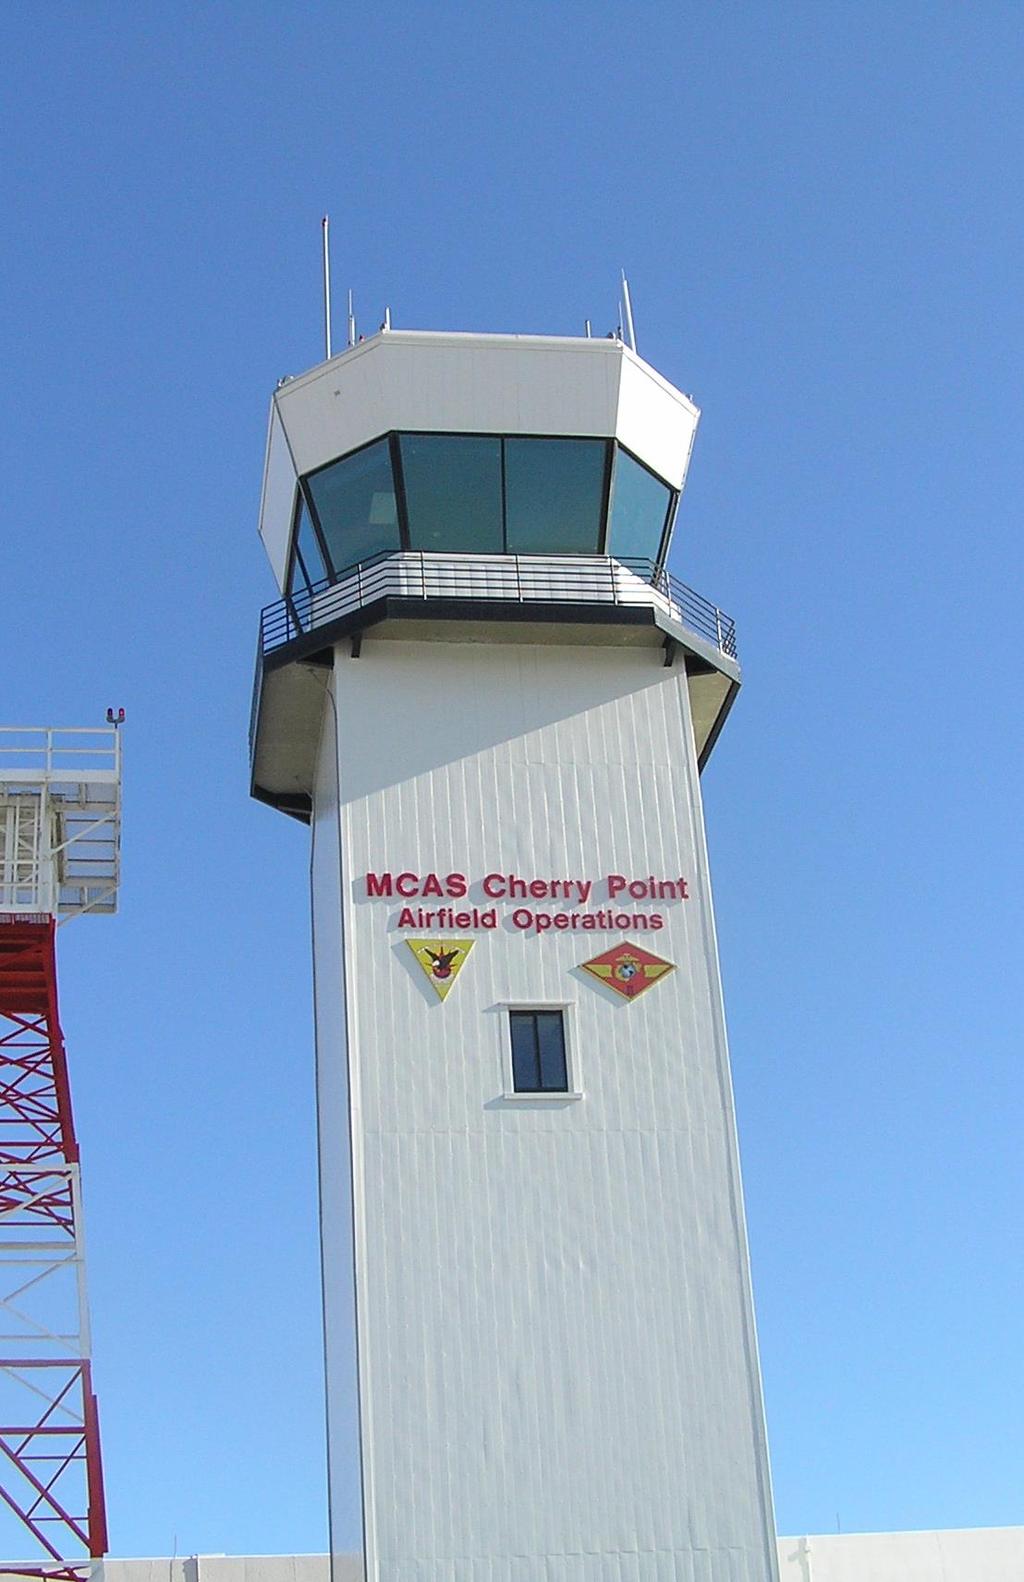 Control Tower Facility that uses air/ground communications, visual signals and other devices